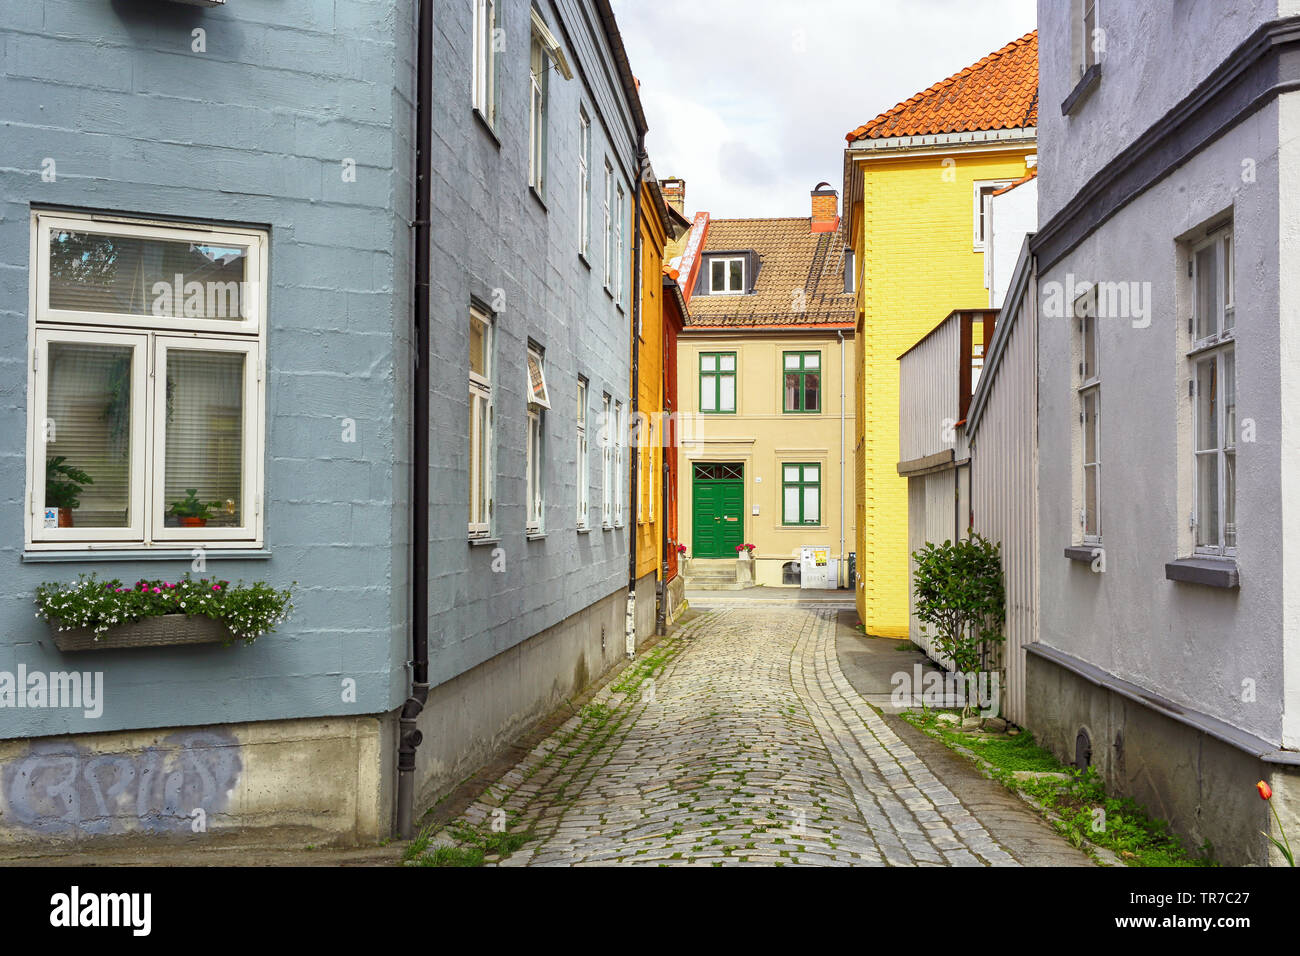 Trondheim, Norway 05/29/2019  : Bakklandet - popular touristic district in Trondheim with colorful wooden houses and shops Stock Photo